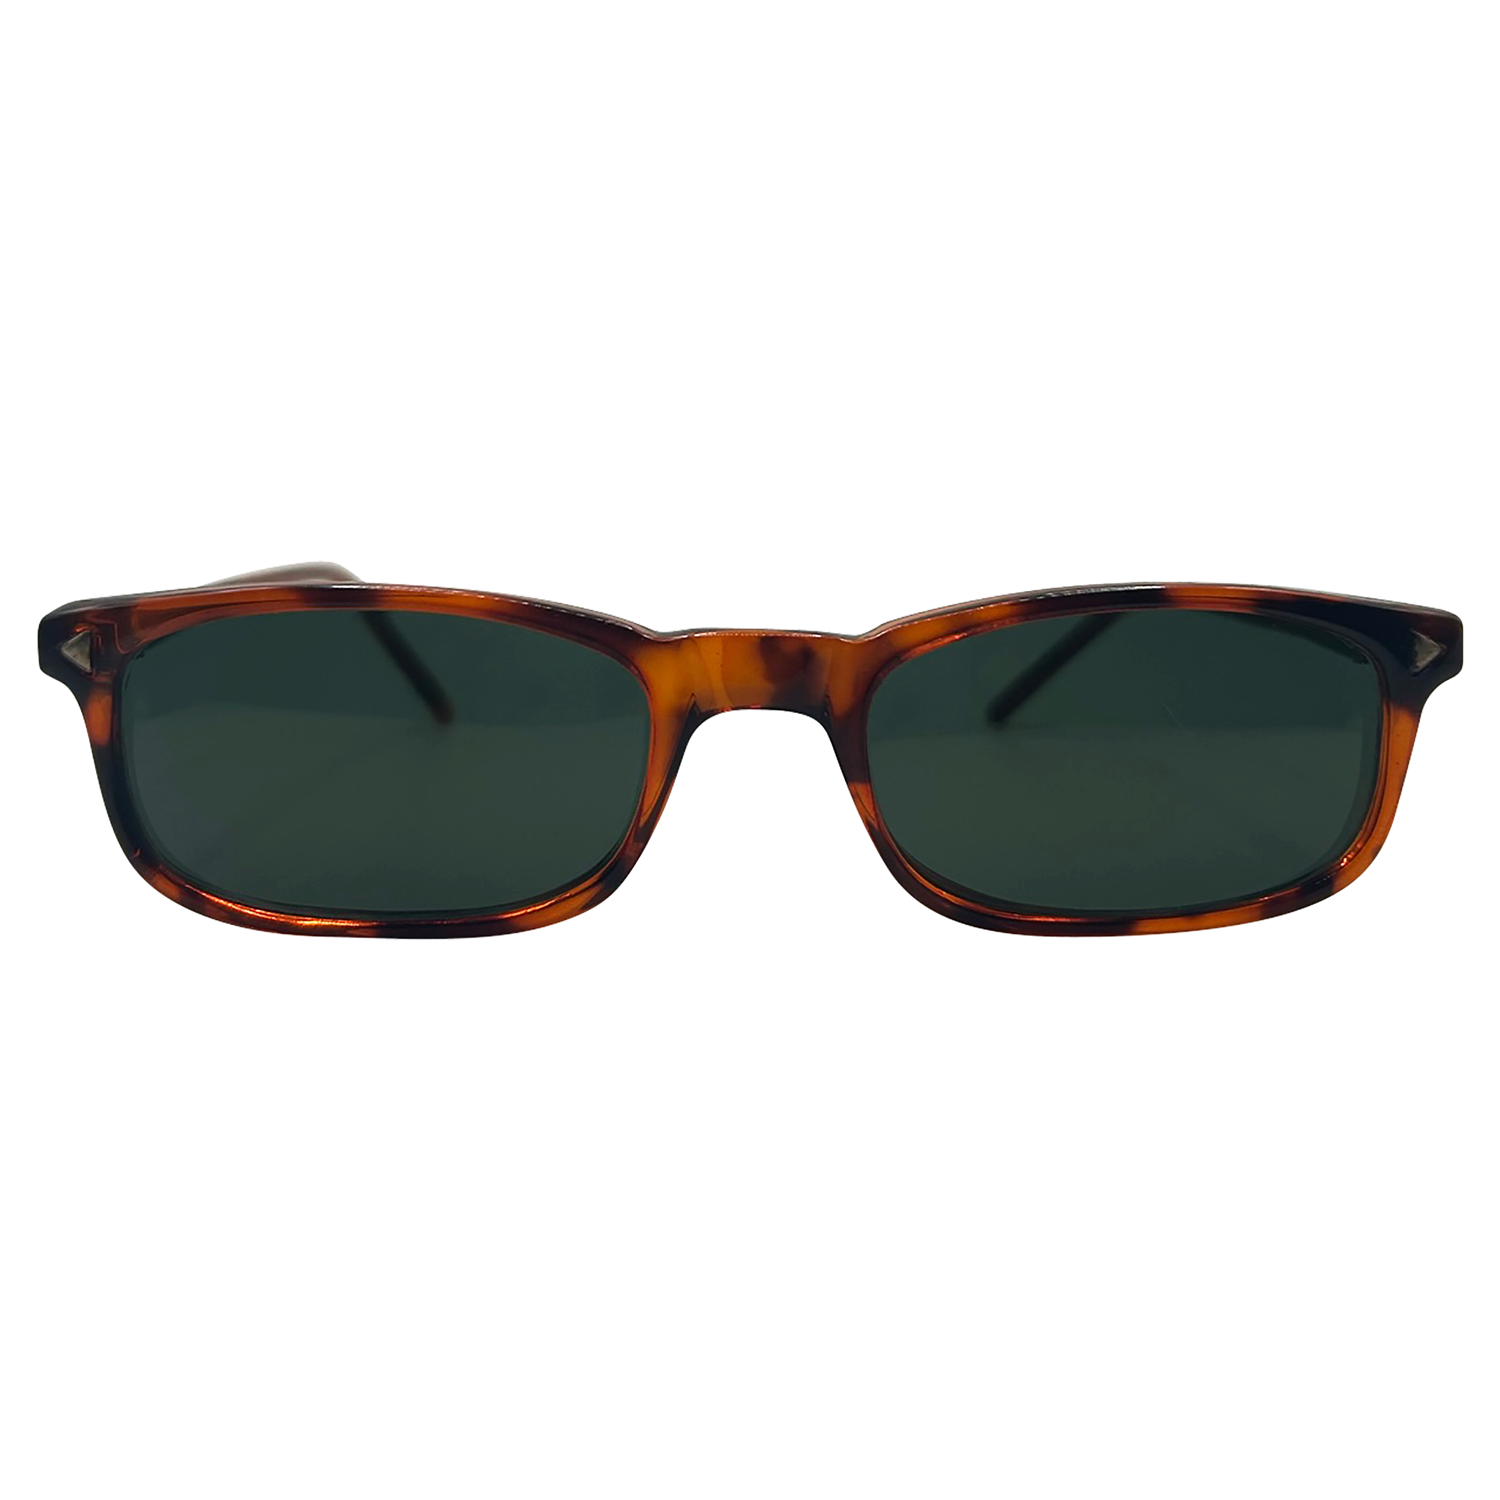 EASTLY Vintage Square Sunglasses